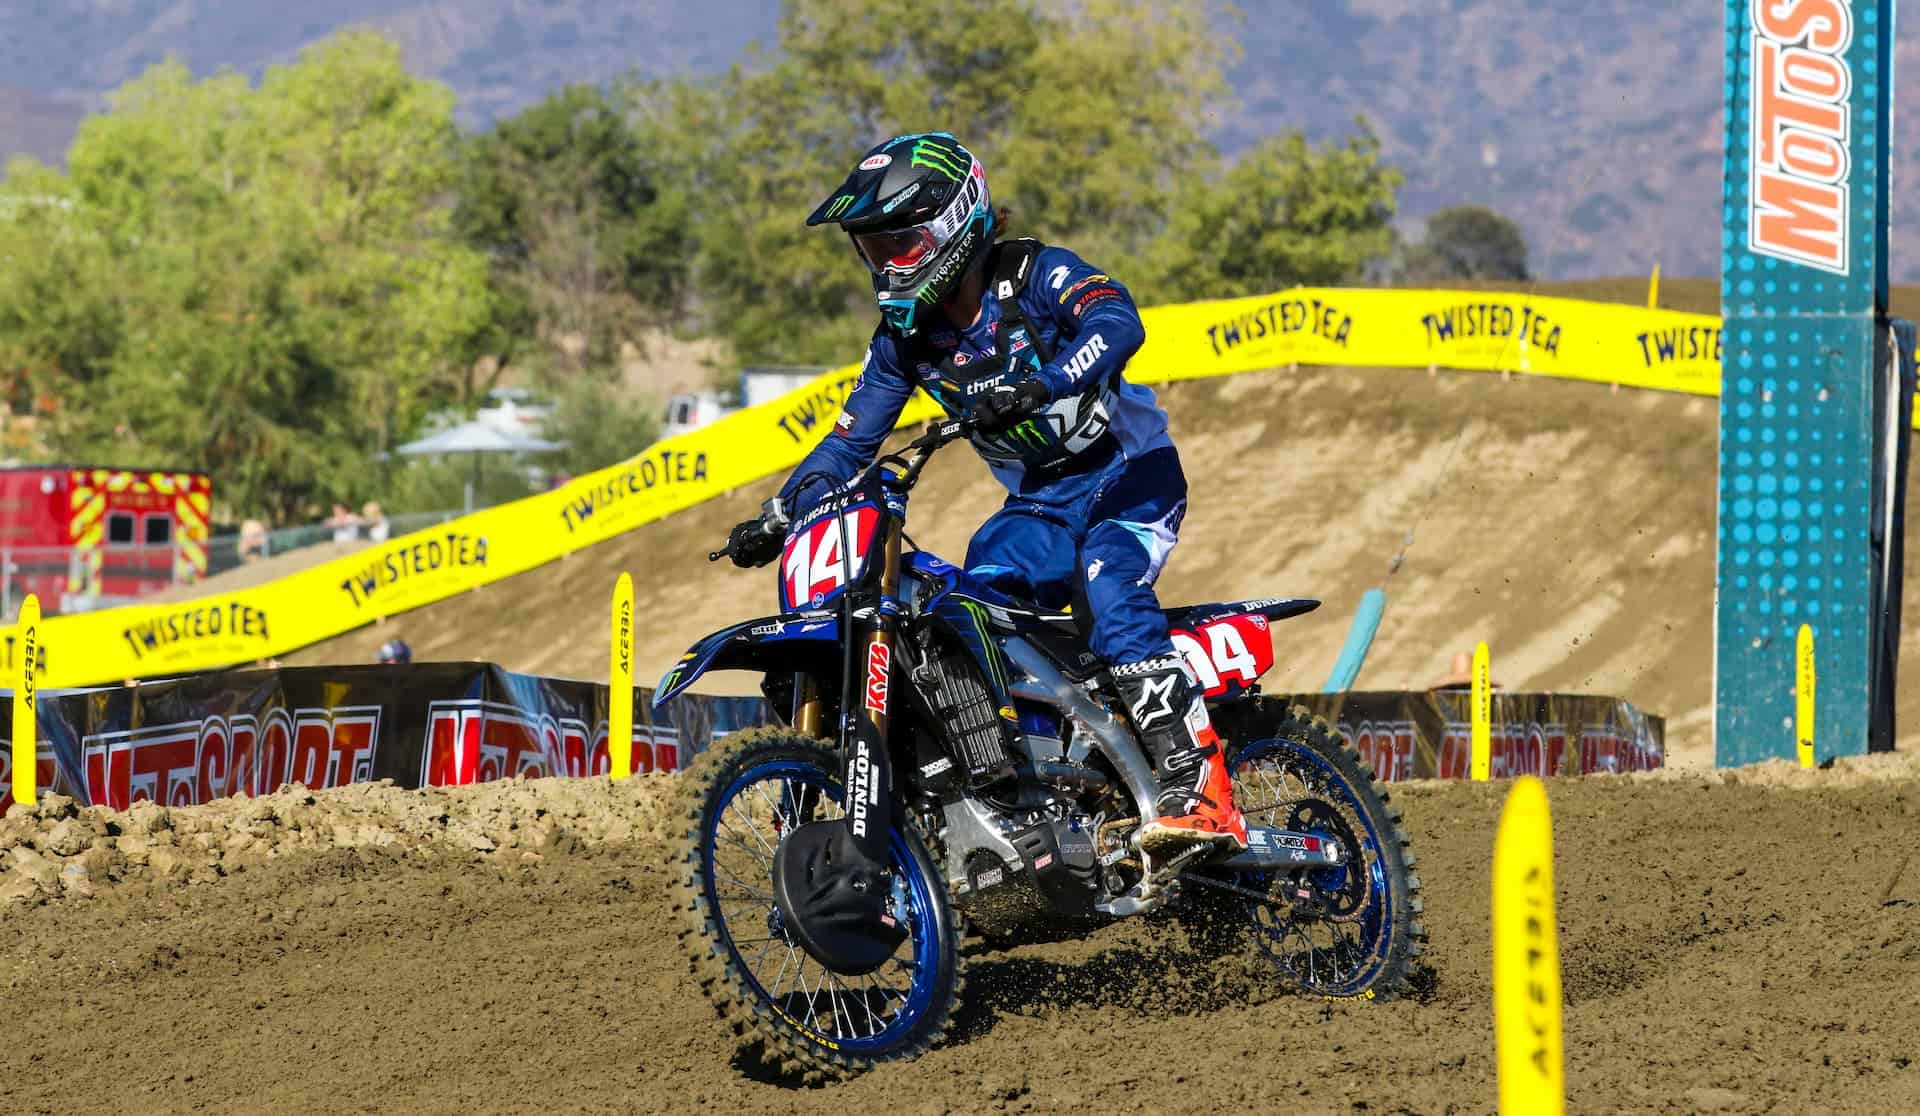 Dylan Ferrandis steals the fastest qualifying time on his last timed lap at Fox Raceway II in the 2021 Pro Motocross season. Photo by Rachel Schuoler / Kickin' the Tires